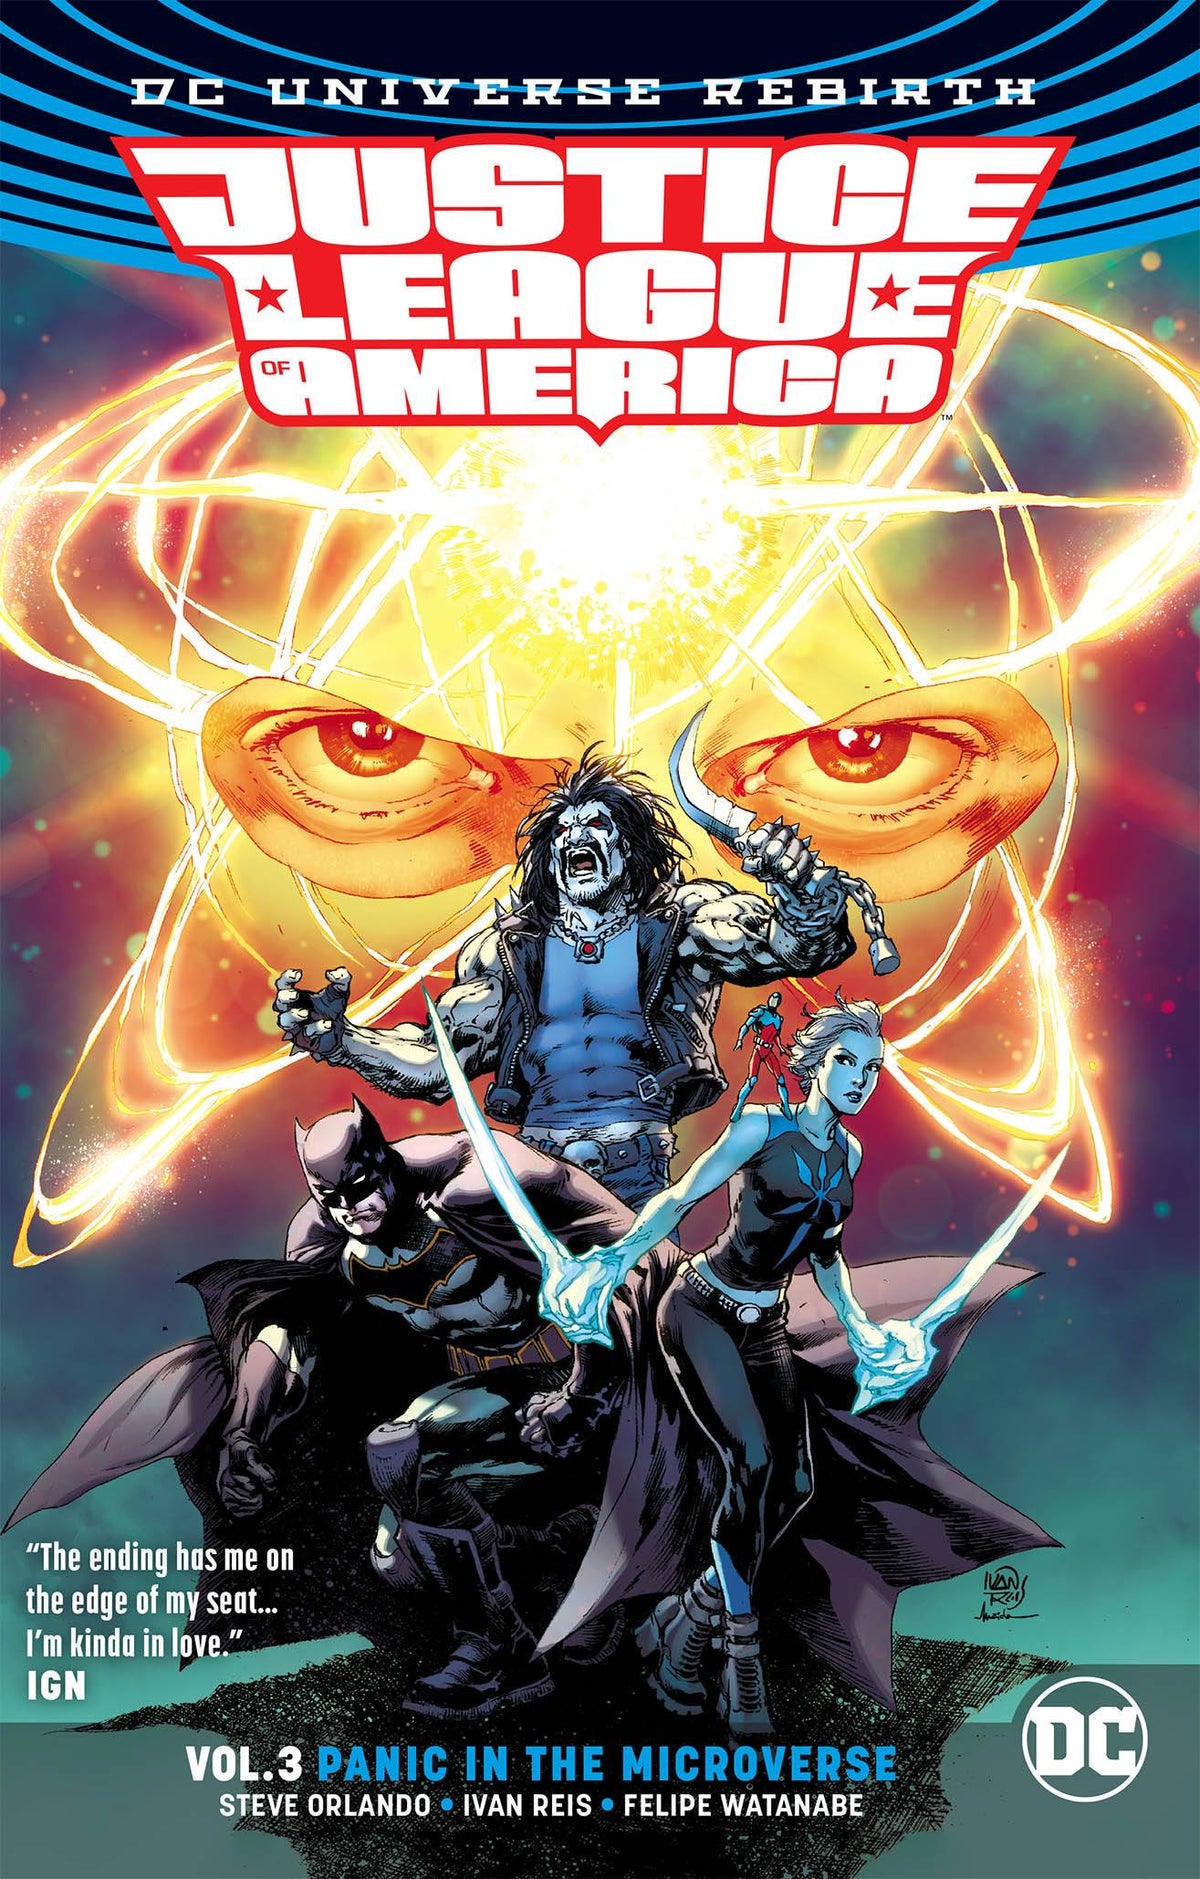 Justice League of America (Rebirth) Vol 03 Panic in the Multiverse TP - State of Comics